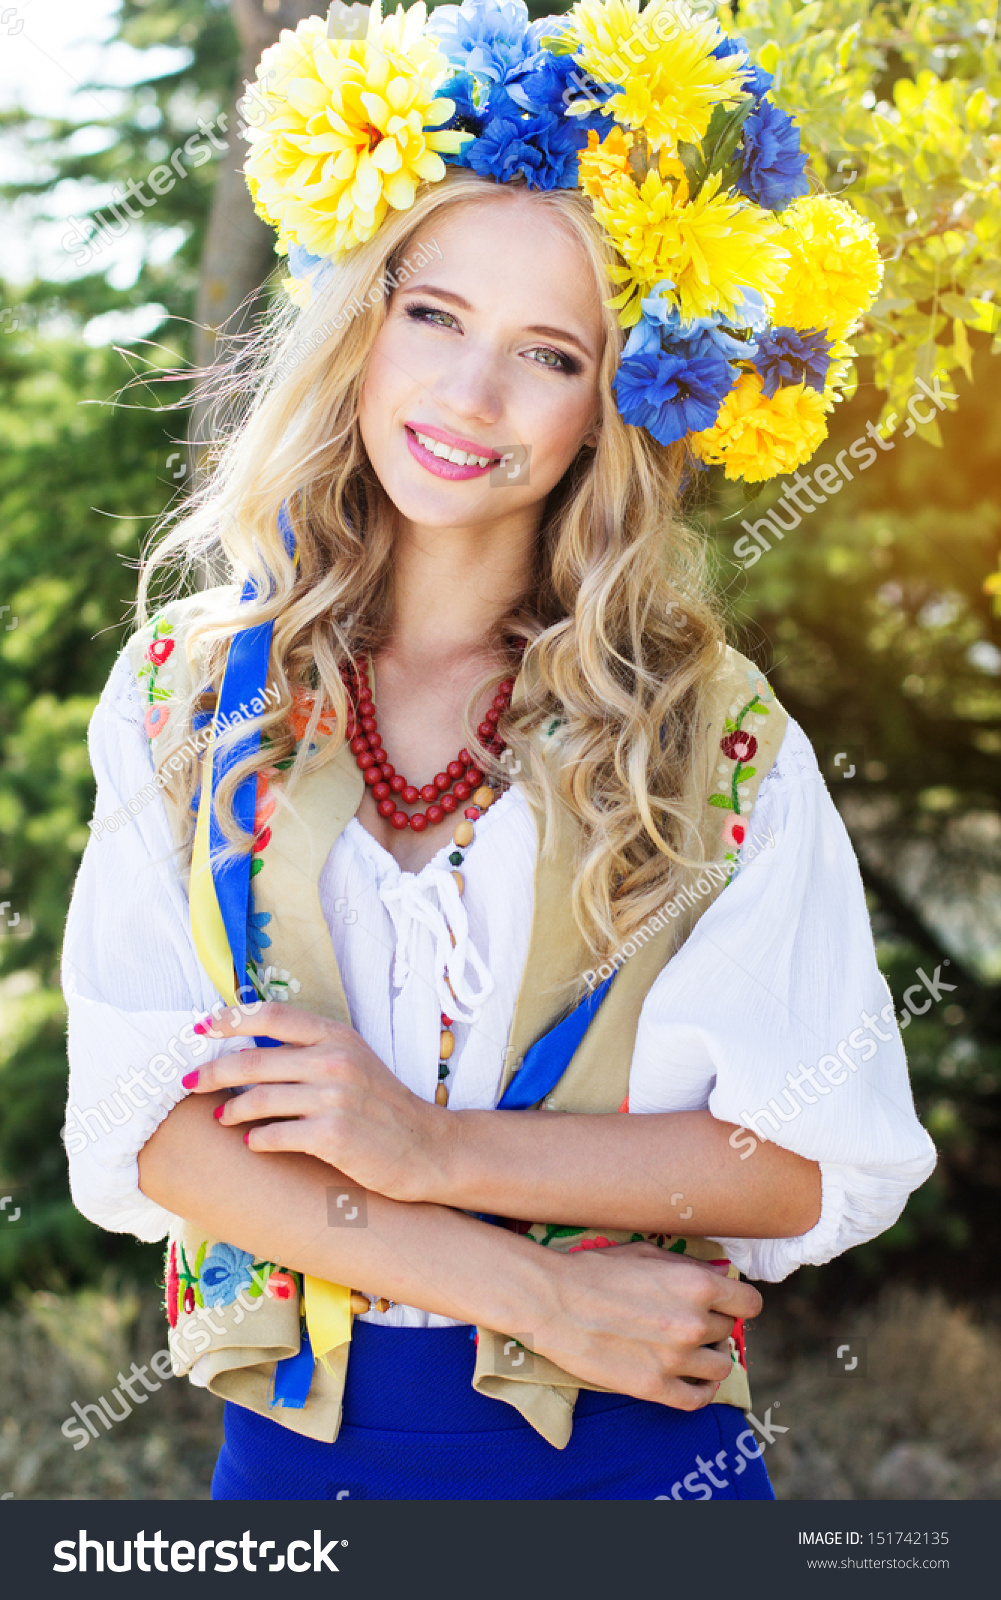 Papa marks sere - Page 5 Stock-photo-portrait-of-a-beautiful-ukrainian-girl-in-national-costume-151742135